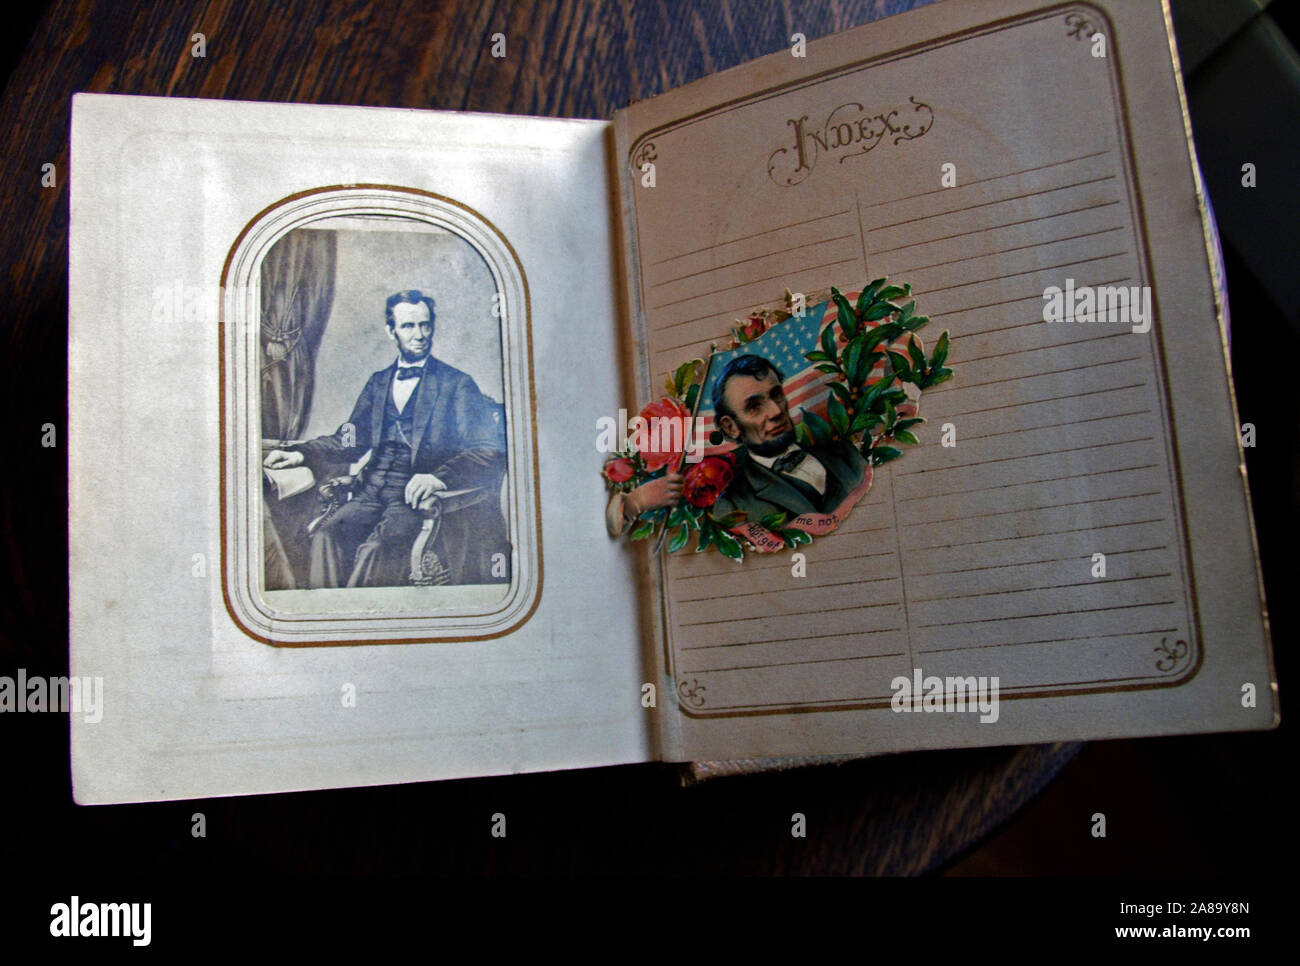 Vintage photo album circa late 1800s with a photograph of President Abraham Lincoln and a colorful cutout illustration of Lincoln. Stock Photo